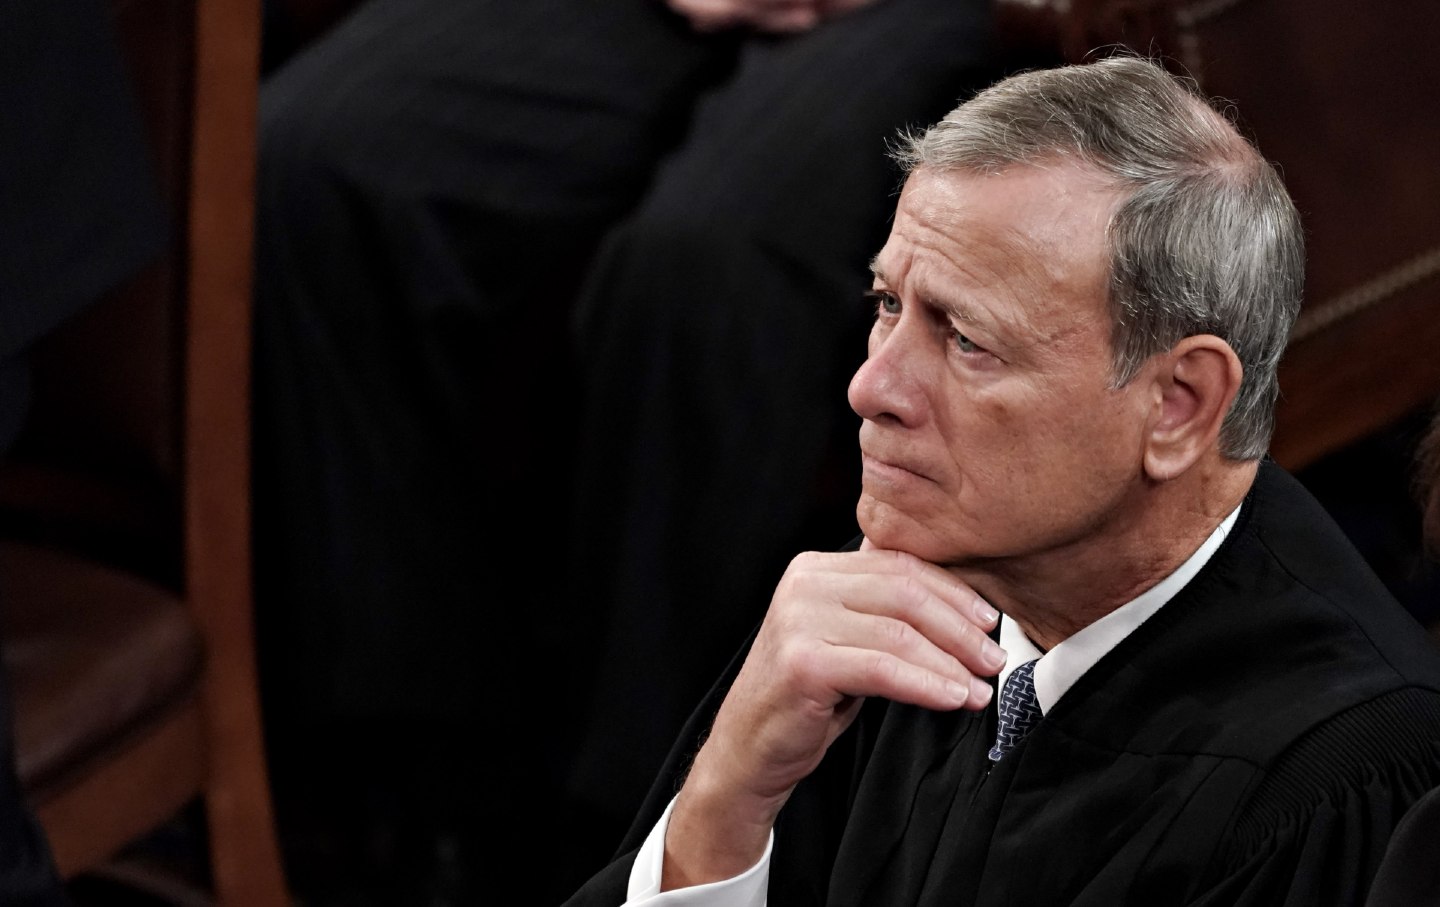 John Roberts, chief justice of the US Supreme Court, during a State of the Union address at the US Capitol in Washington, D.C., on Tuesday, February 7, 2023.